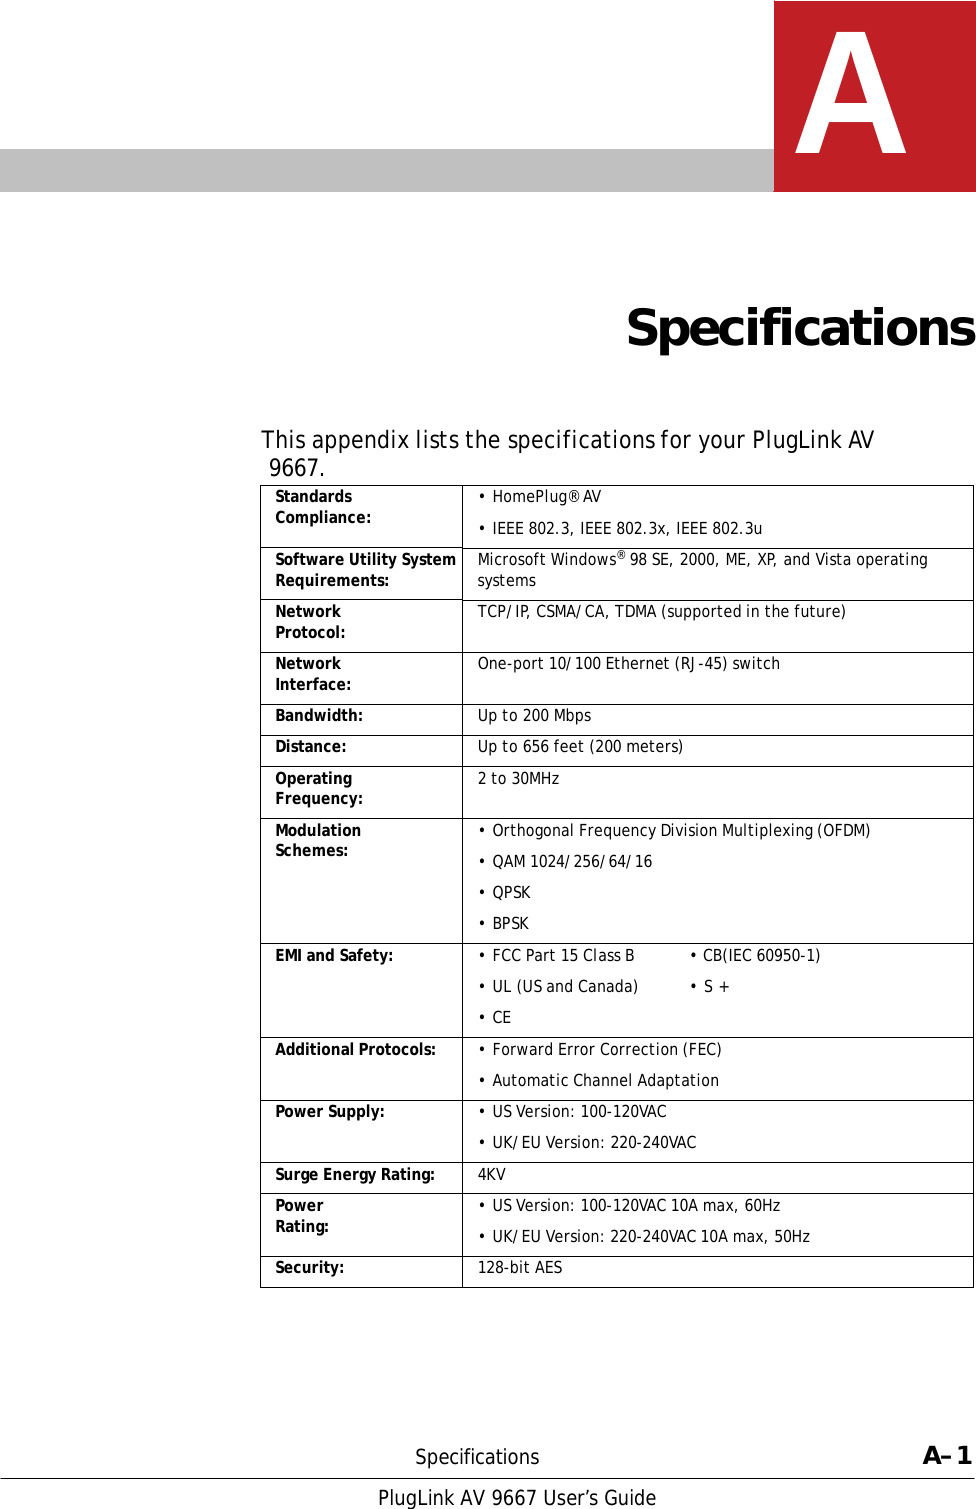   A     Specifications    This appendix lists the specifications for your PlugLink AV 9667.  Standards Compliance: • HomePlug® AV  • IEEE 802.3, IEEE 802.3x, IEEE 802.3u Software Utility System Requirements: Microsoft Windows® 98 SE, 2000, ME, XP, and Vista operating systems Network Protocol: TCP/IP, CSMA/CA, TDMA (supported in the future) Network Interface: One-port 10/100 Ethernet (RJ-45) switch Bandwidth: Up to 200 MbpsDistance: Up to 656 feet (200 meters)Operating Frequency: 2 to 30MHzModulation Schemes: • Orthogonal Frequency Division Multiplexing (OFDM)  • QAM 1024/256/64/16  • QPSK  • BPSK EMI and Safety: • FCC Part 15 Class B  • CB(IEC 60950-1)  • UL (US and Canada)  • S +  • CE Additional Protocols: • Forward Error Correction (FEC)  • Automatic Channel Adaptation Power Supply: • US Version: 100-120VAC  • UK/EU Version: 220-240VAC Surge Energy Rating: 4KVPower Rating: • US Version: 100-120VAC 10A max, 60Hz  • UK/EU Version: 220-240VAC 10A max, 50Hz Security: 128-bit AES       Specifications  A–1  PlugLink AV 9667 User’s Guide 